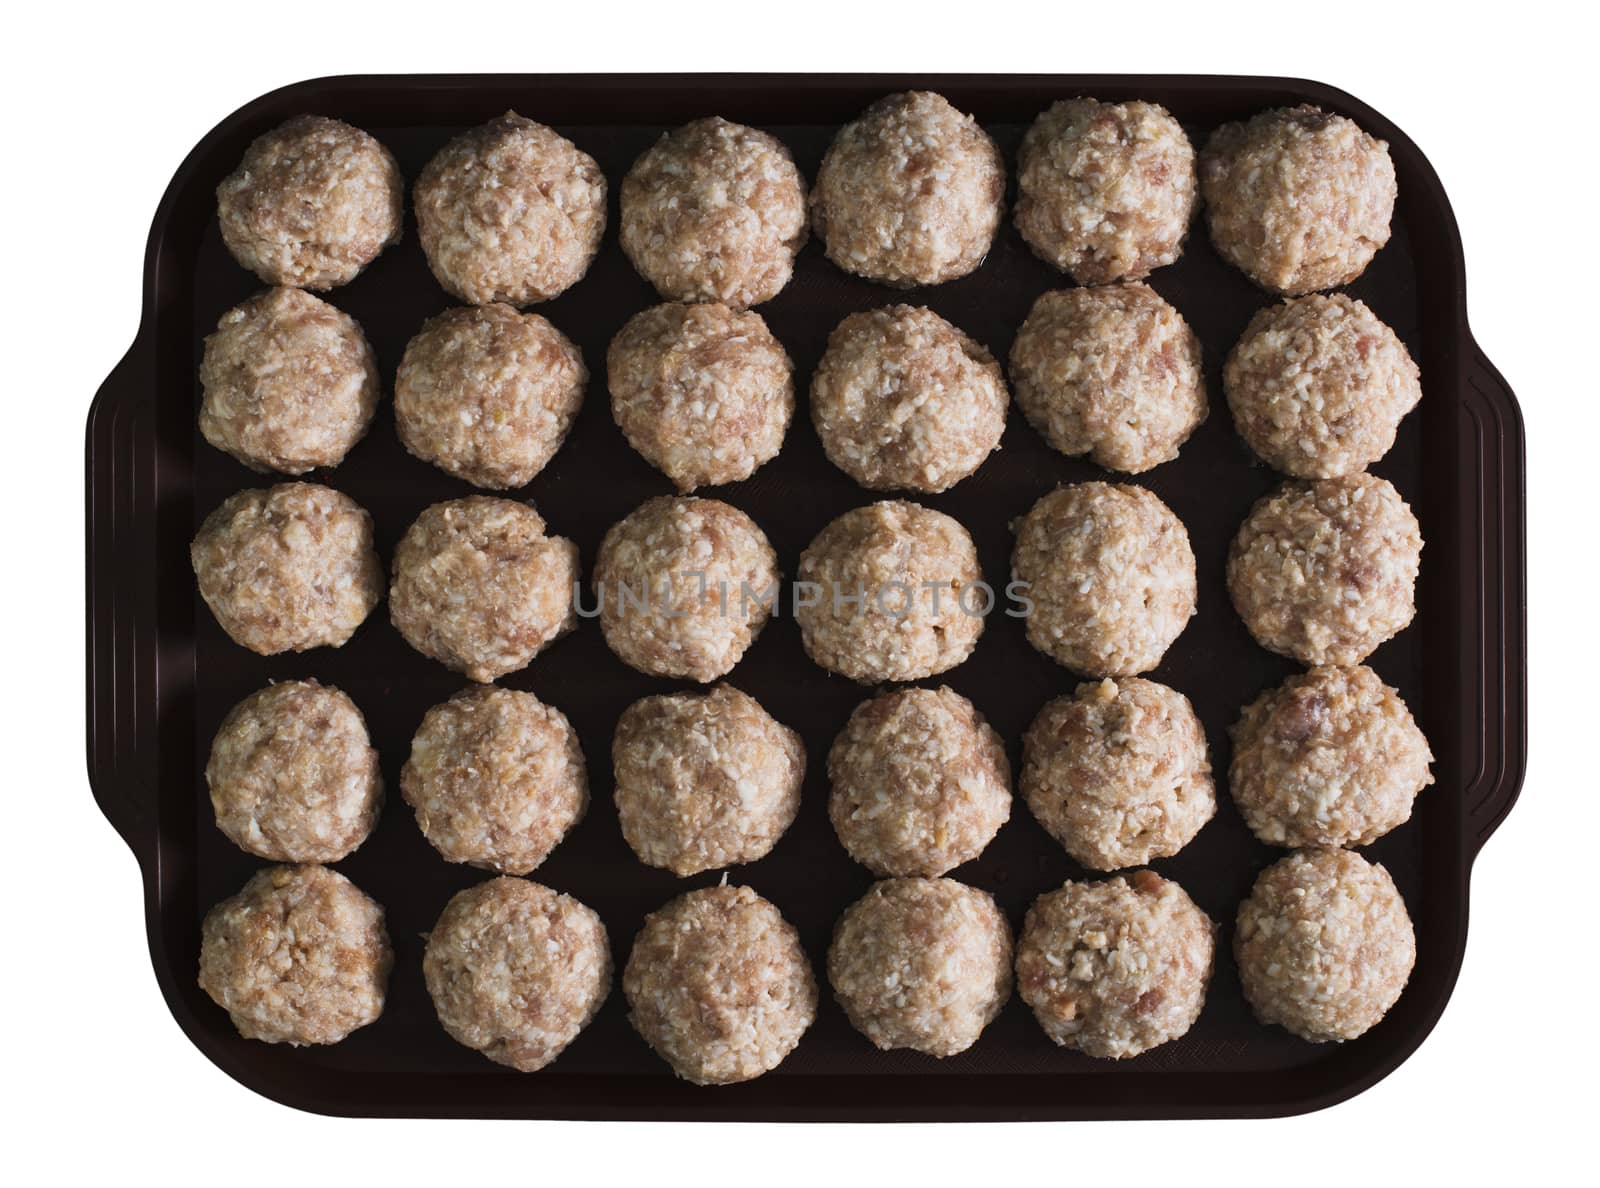 Lots uncooked meatballs on the dark tray, isolated